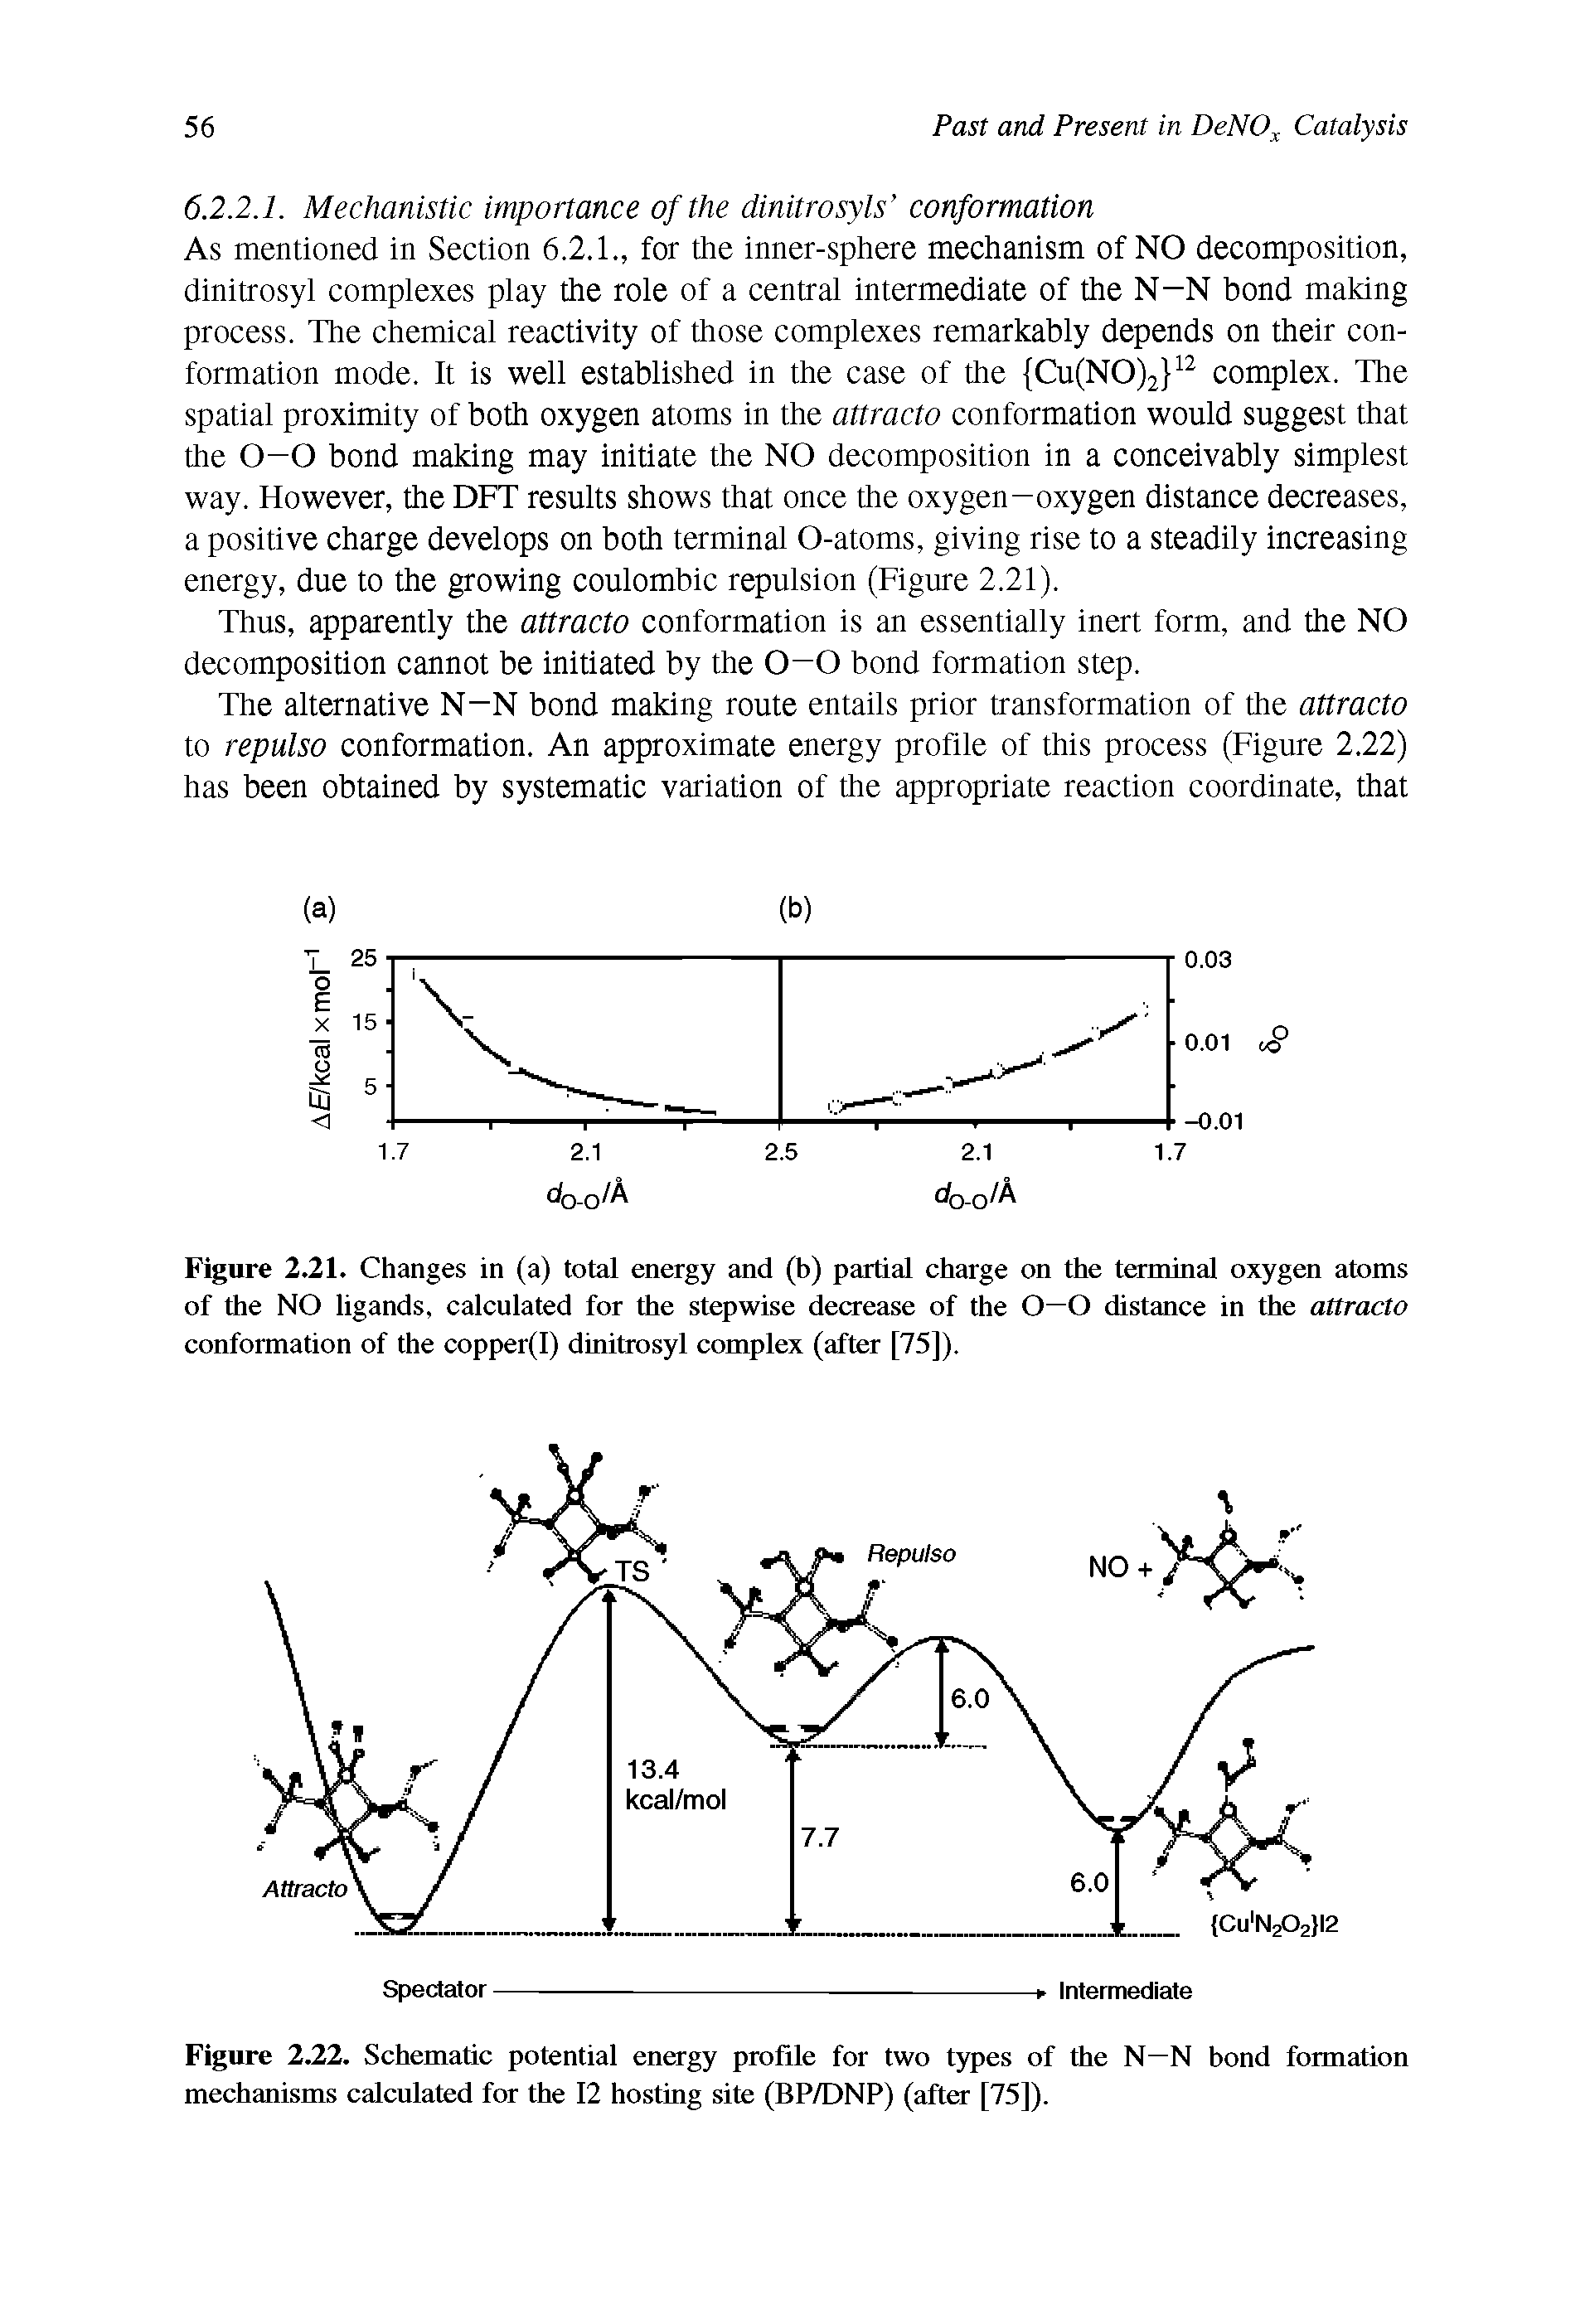 Figure 2.21. Changes in (a) total energy and (b) partial charge on the terminal oxygen atoms of the NO ligands, calculated for the stepwise decrease of the 0—0 distance in the attracto conformation of the copper(I) dinitrosyl complex (after [75]).